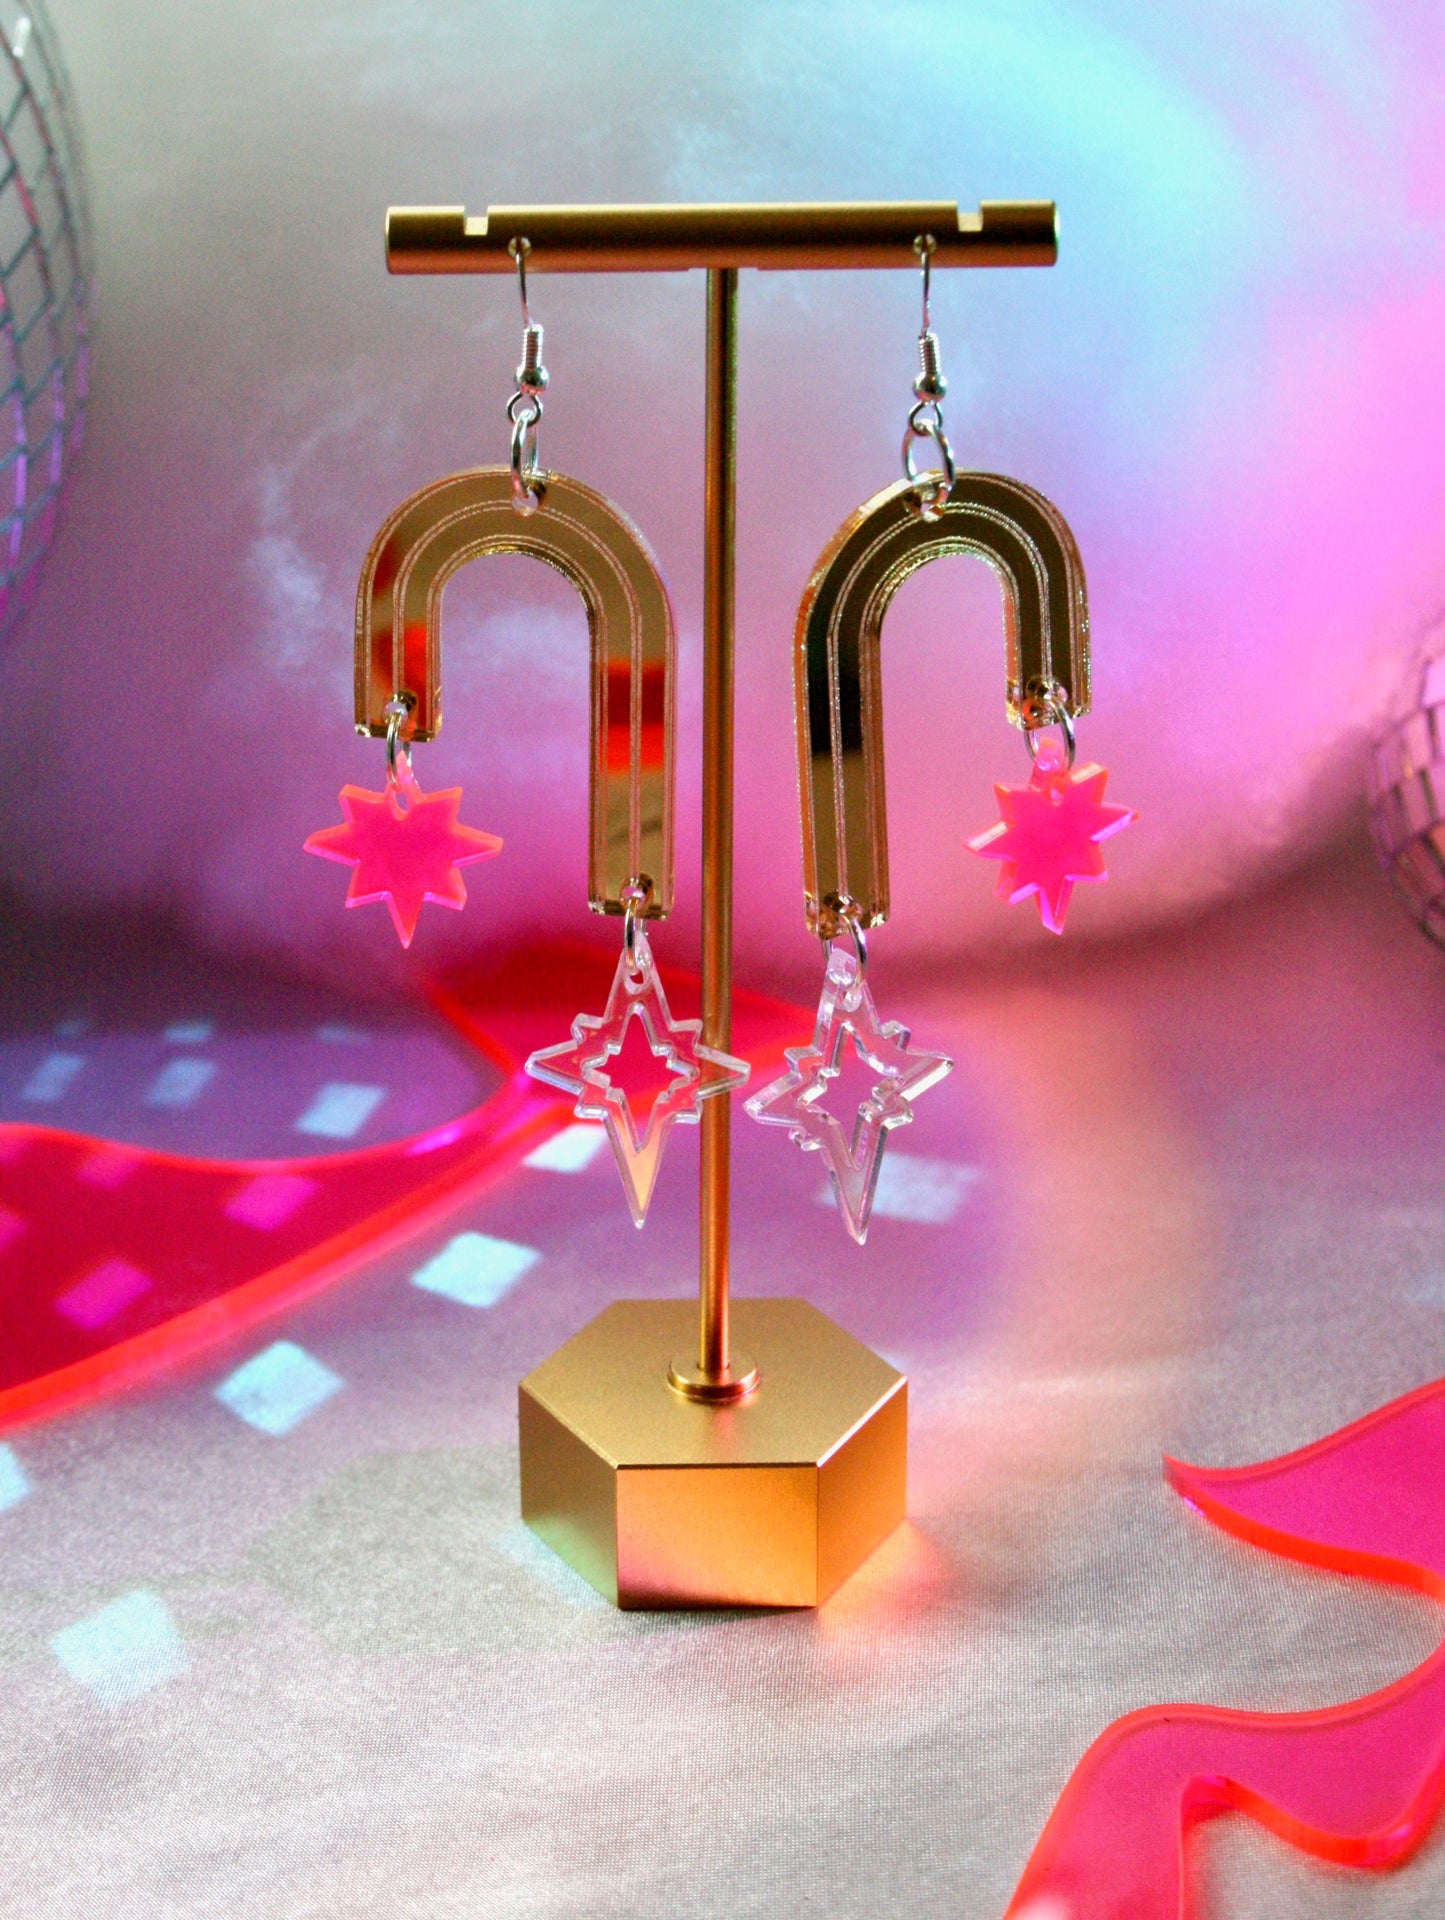 Art Deco Archway Earrings- Gold Hot Pink Iridescent Reflective Portal Statement